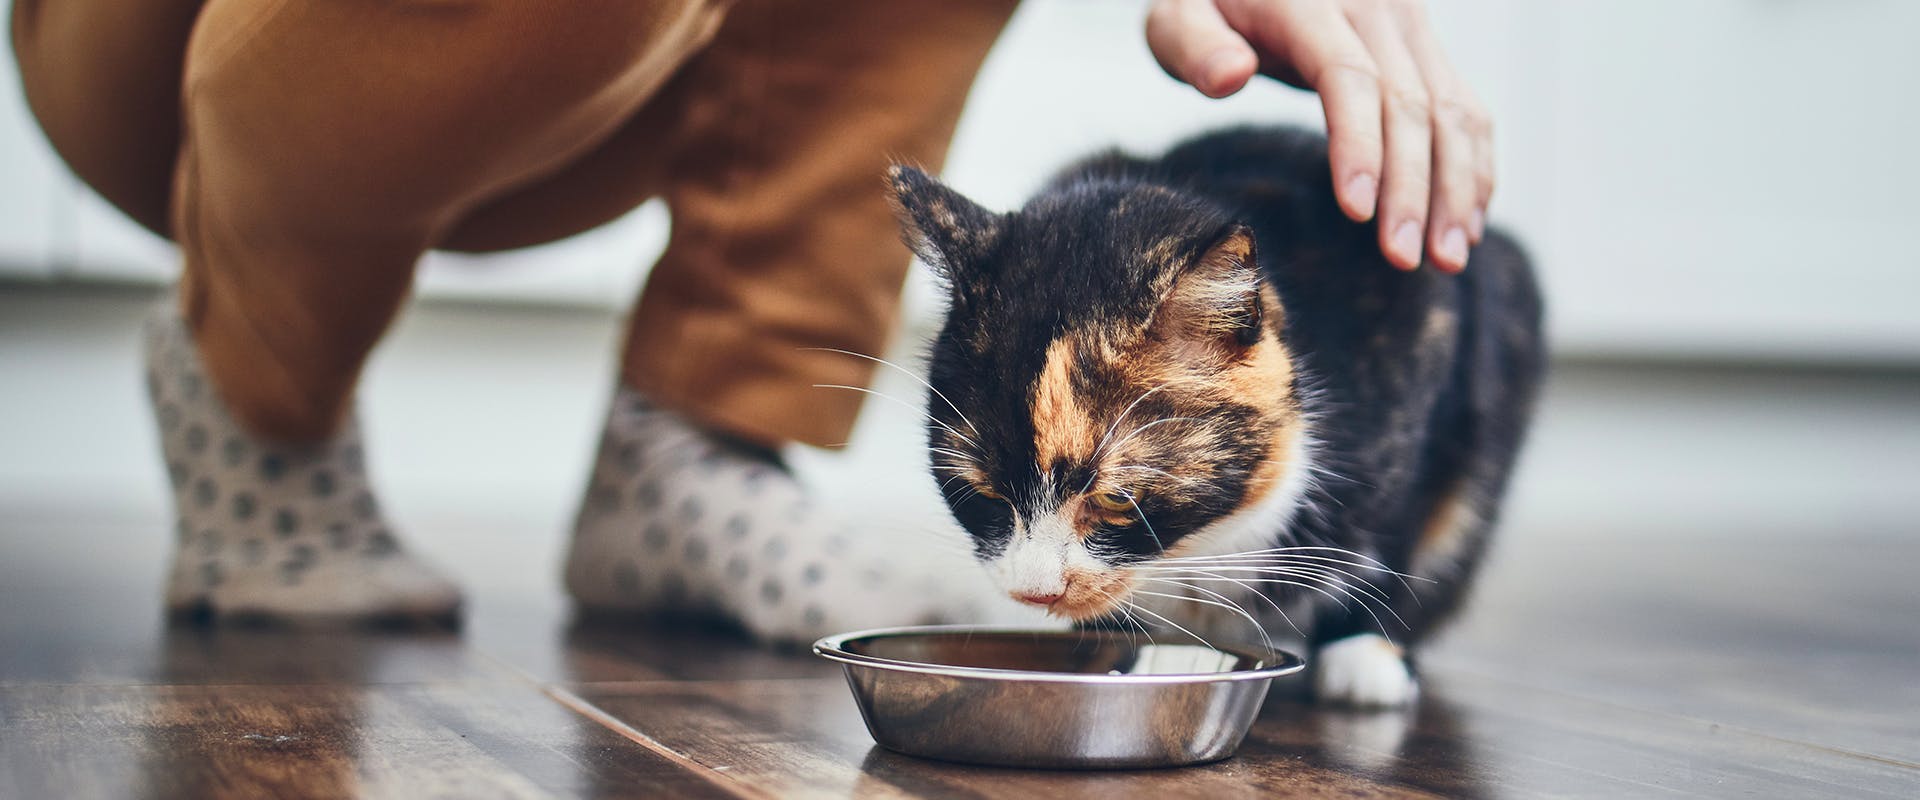 A cat eating from a bowl, a hand coming down to pet them